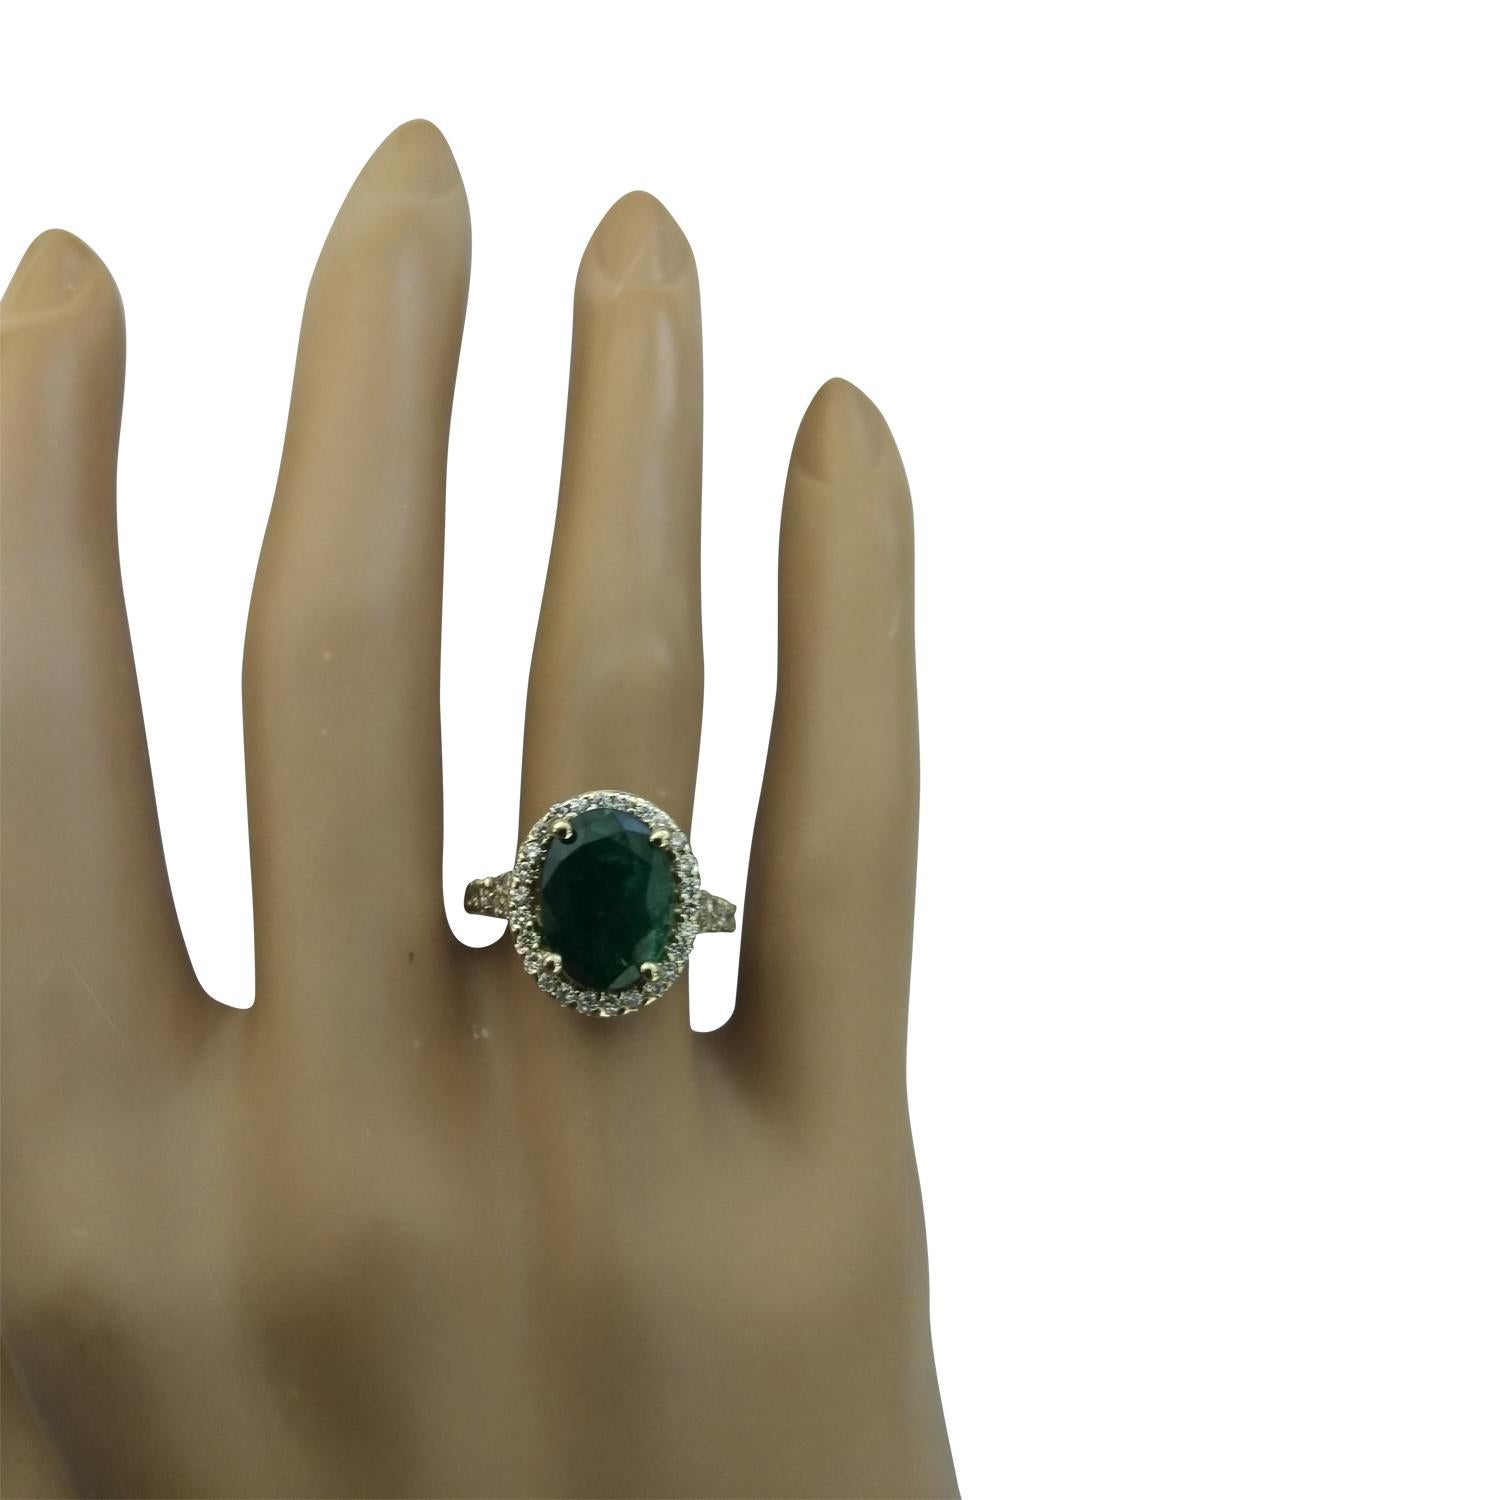 3.70 Carat Natural Emerald 14 Karat Solid Yellow Gold Diamond Ring
Stamped: 14K 
Total Ring Weight: 5.4 Grams
Emerald Weight 3.10 Carat (11.00x9.00 Millimeters)
Diamond Weight: 0.60 carat (F-G Color, VS2-SI1 Clarity )
Face Measures: 14.55x12.45